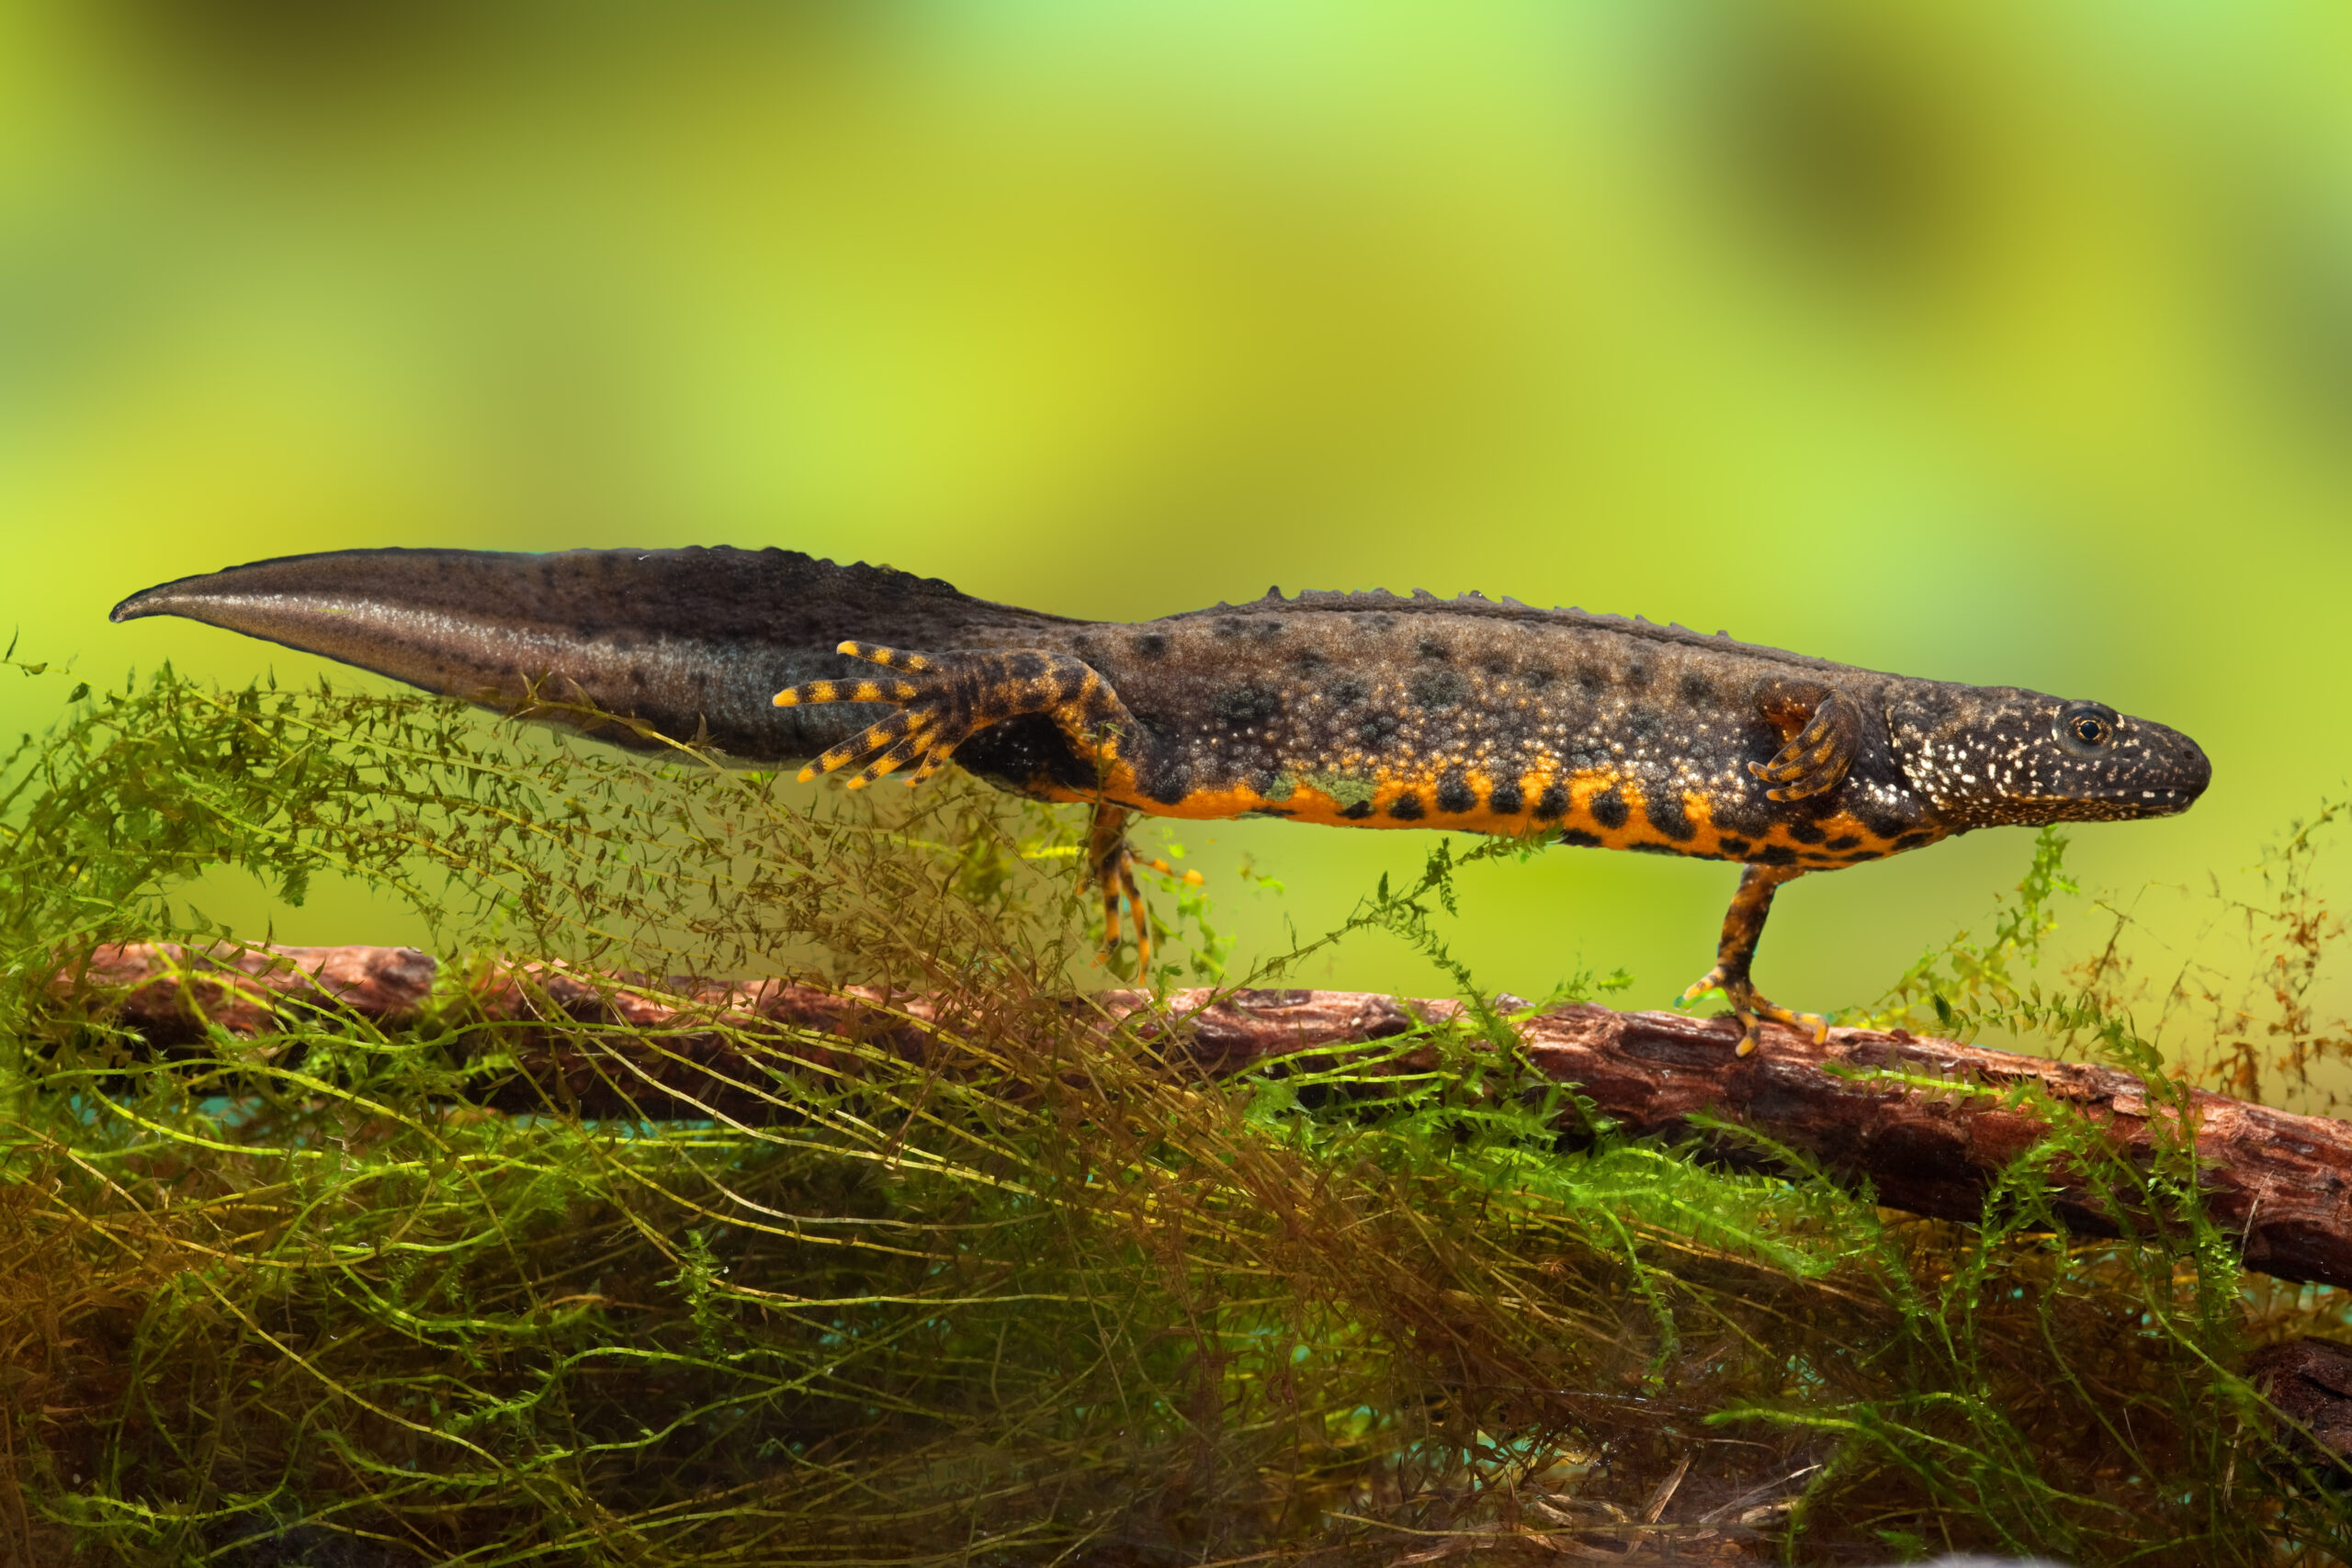 great crested newt or water dragon in fresh water pond endangered and protected species. Nature conservation animal,breeding male